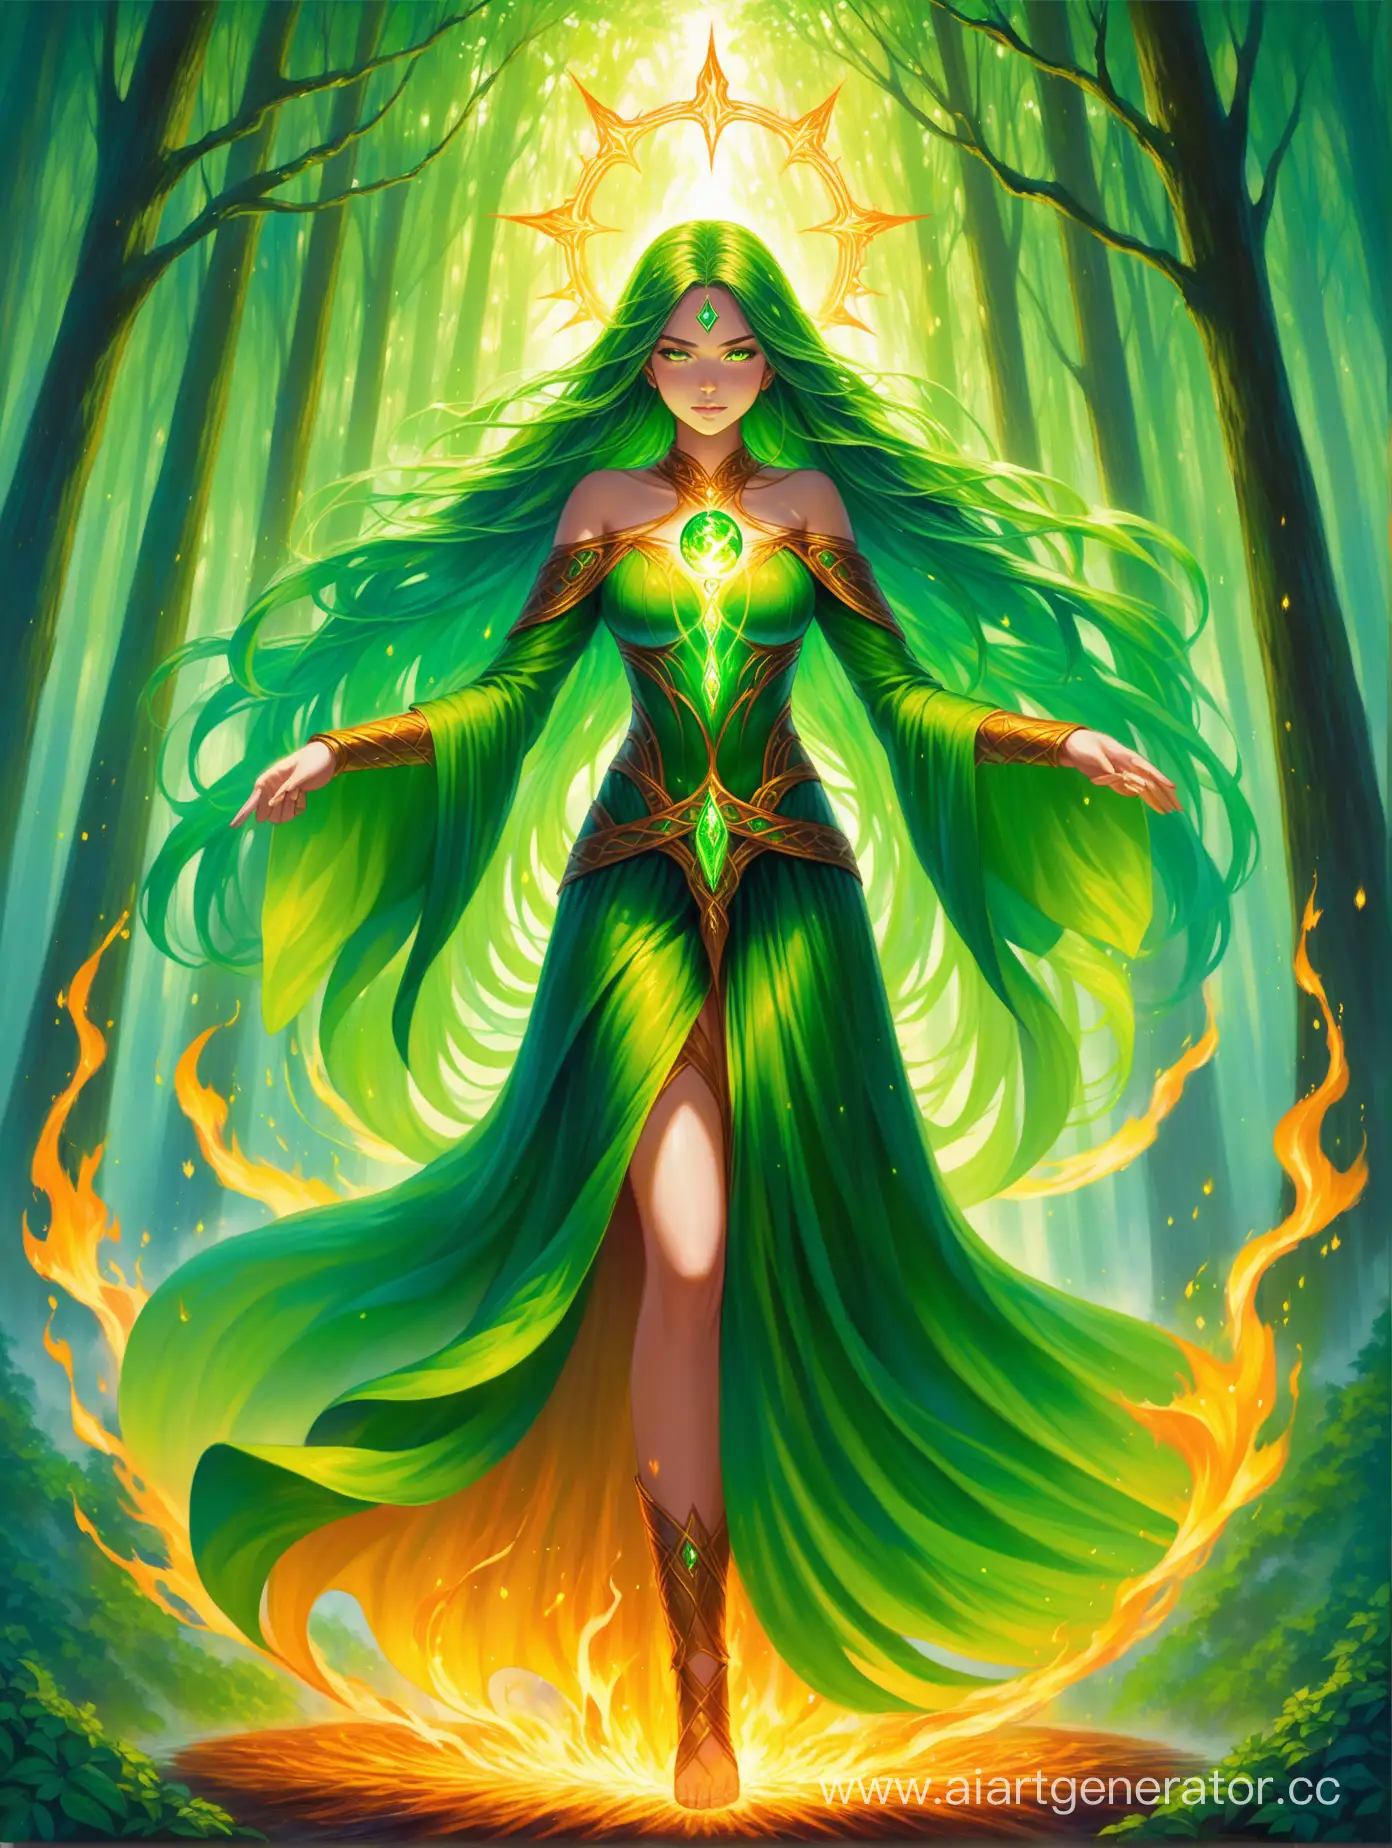 Oil painting,full height,The earth sorceress, wrapped in a halo of green flame, beckons, her eyes blazing with green. Her hair, a cascade of vibrant dark green and yellow, her outfit the color of dark mystical forest, she holds a mystical pendant in the air, Forest dancing around her, power over the element of earth. Her allure is as strong as the hell she wields, drawing you into a world where fire is not only a force of destruction, but also a symbol of wild beauty